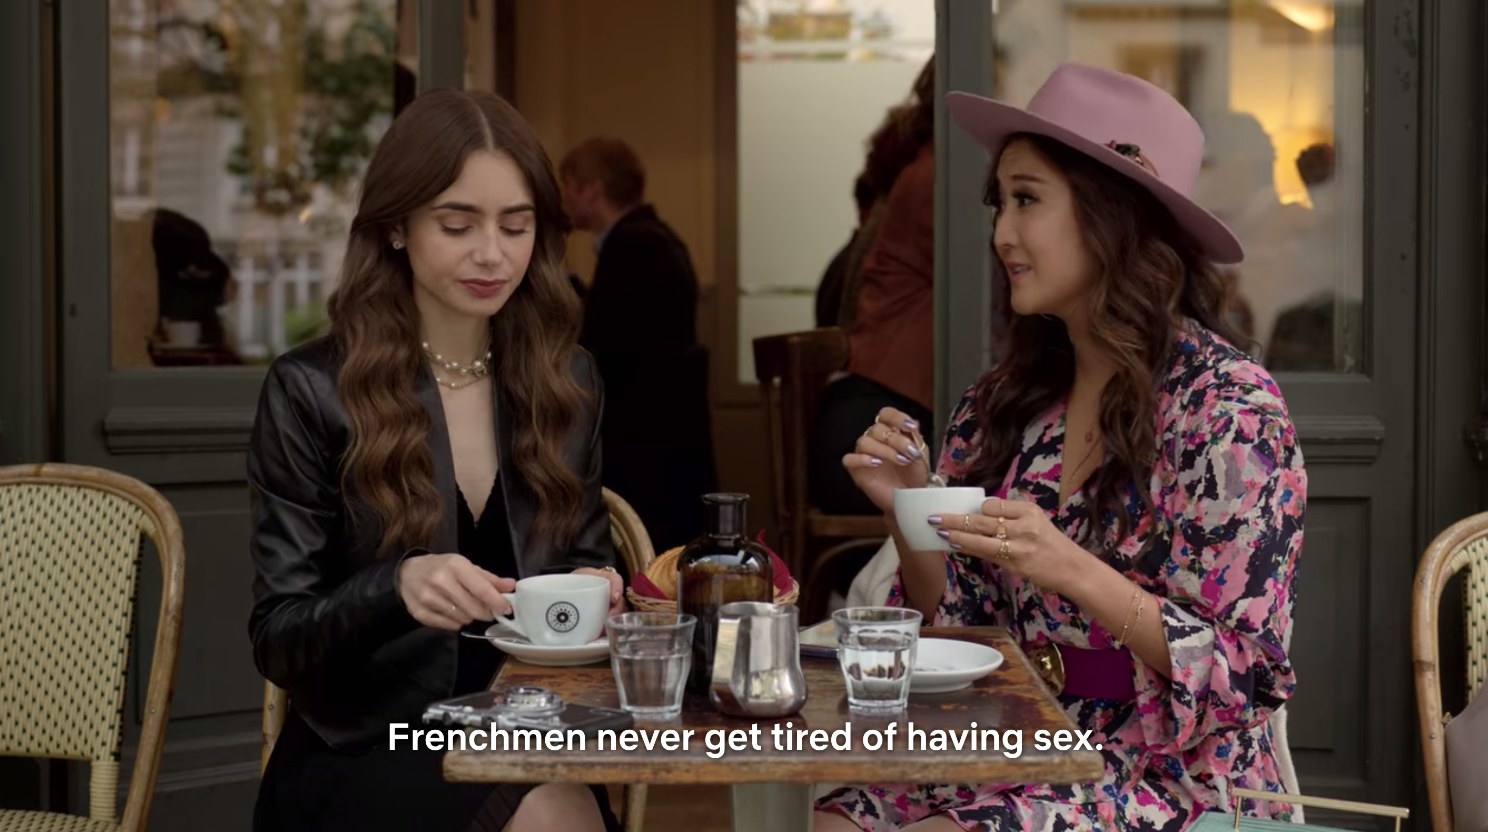 Emily being told &quot;Frenchmen never get tired of having sex.&quot;